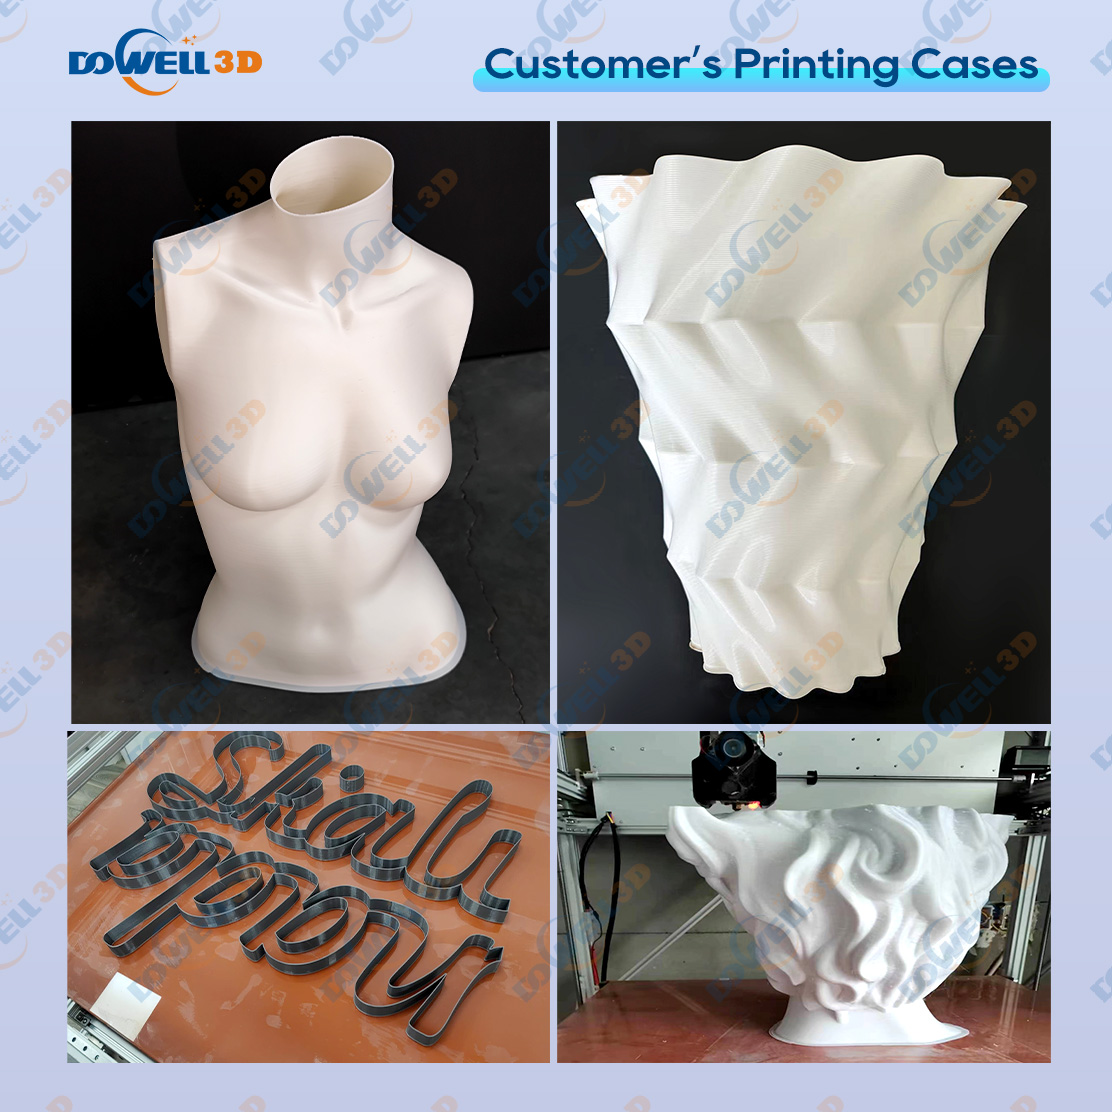 1200mm 3d statue printer High Precision Industrial FDM 3D aluminum Printer for Large Size Prototyping and Manufacturing impresora 3d